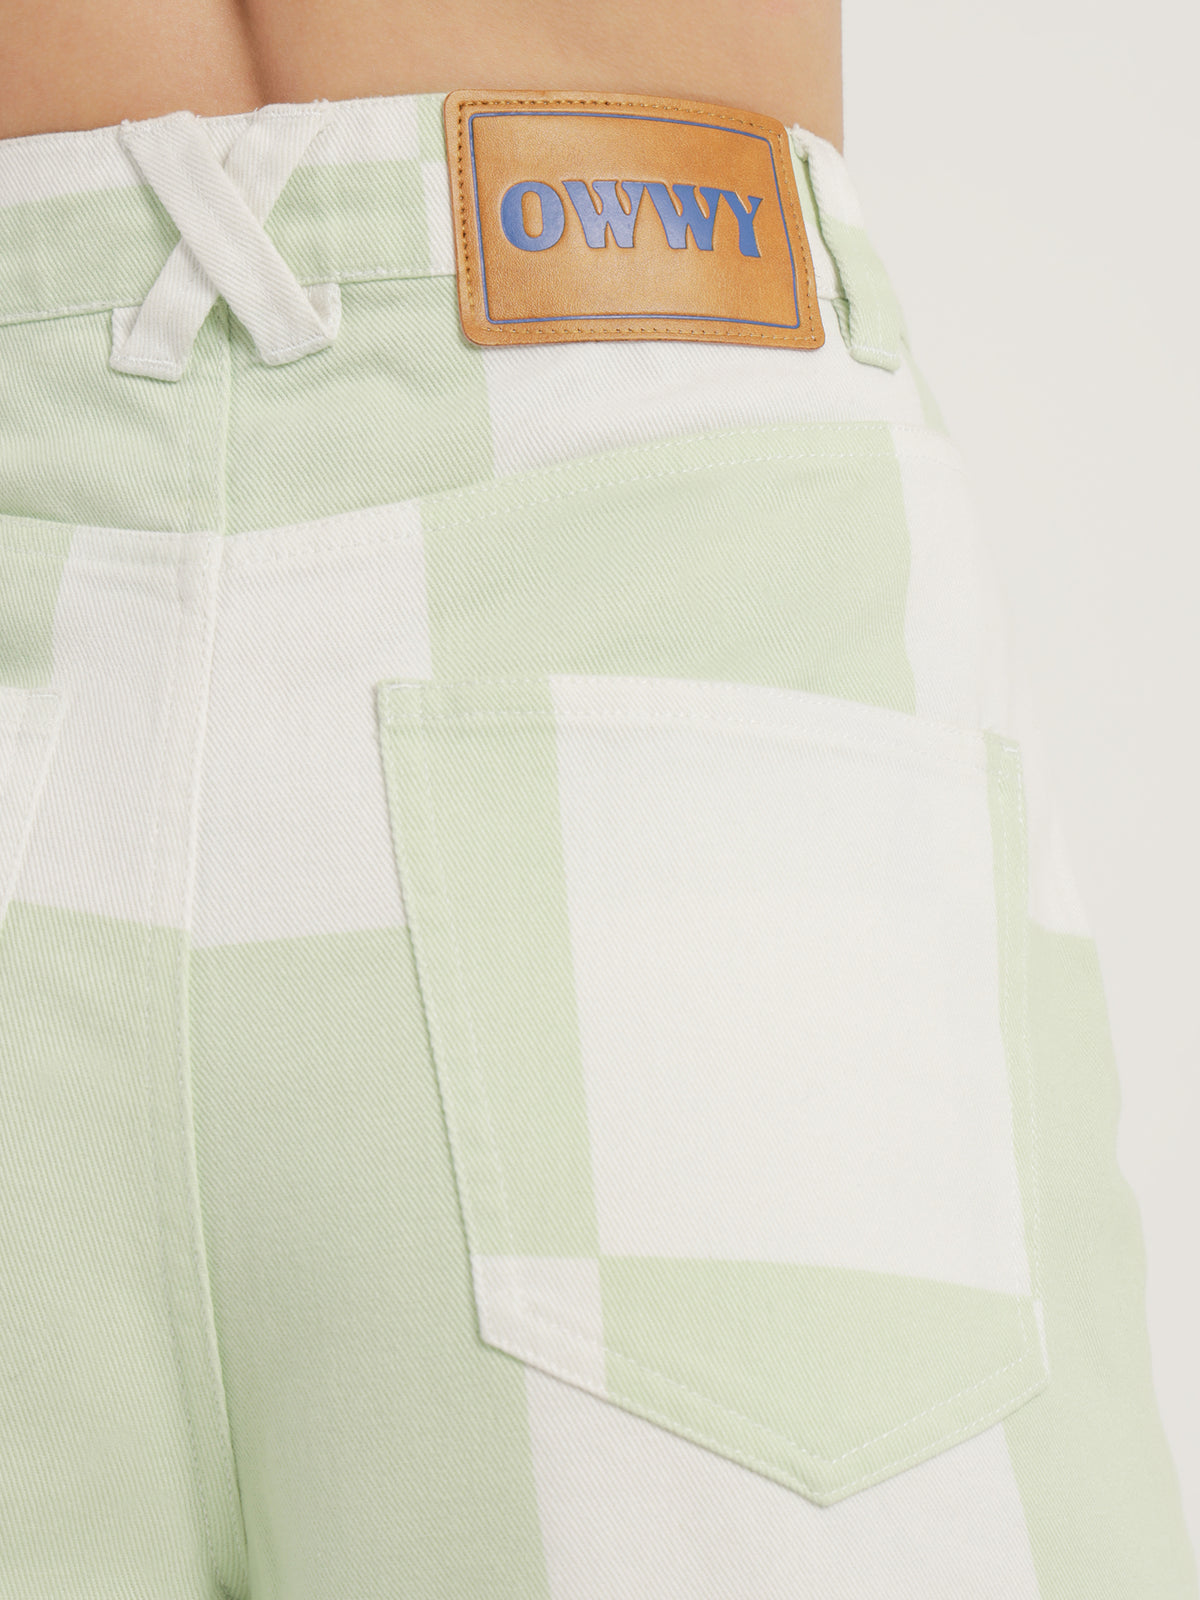 Check Mate Jeans in Lime Check